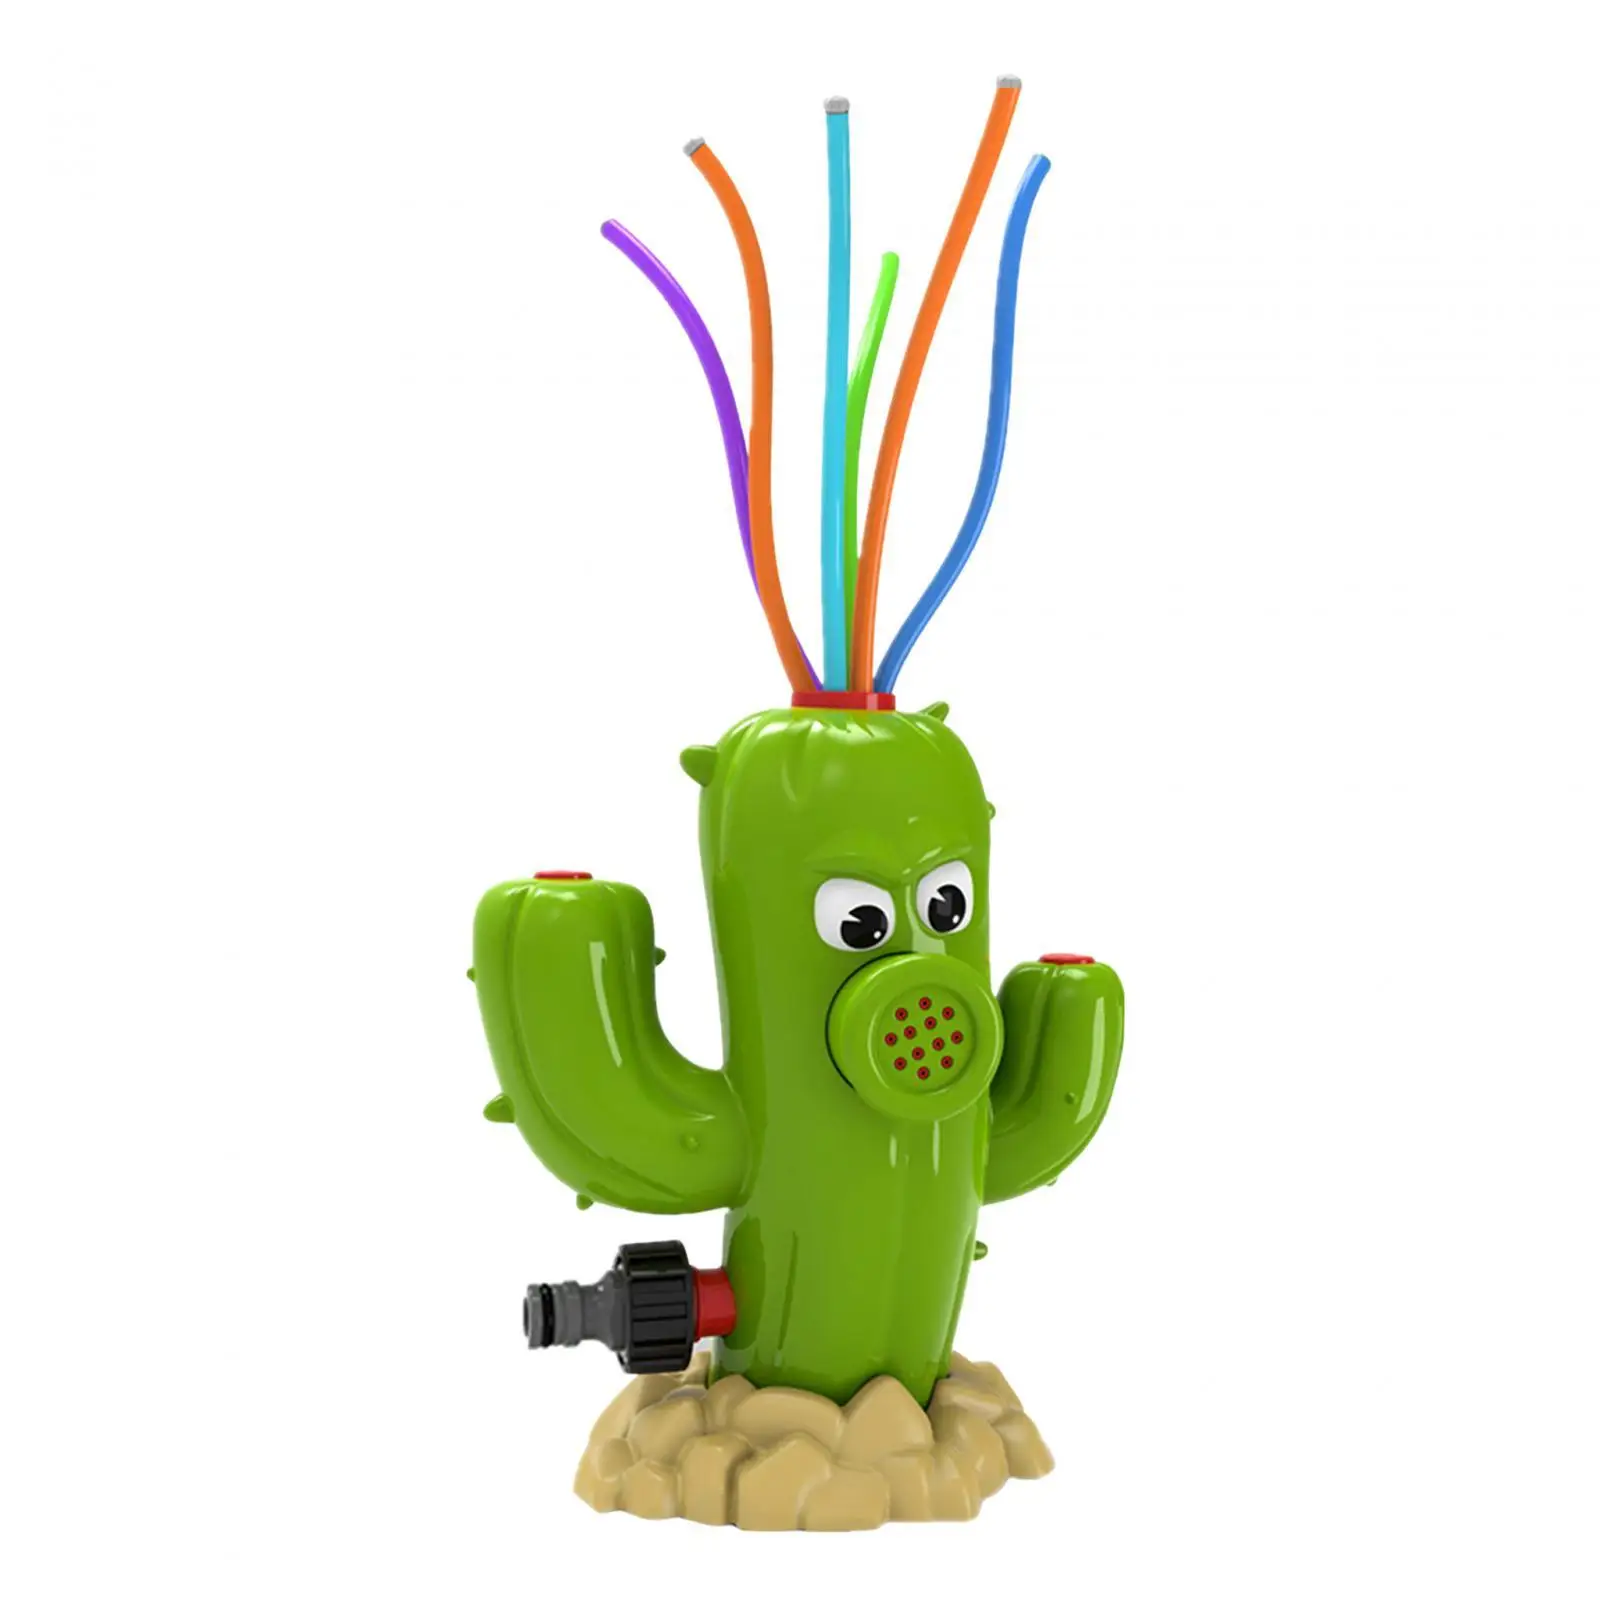 Outdoor Toy Cactus Sprinklers Games Summer Backyard Toy Water Pressure Lift Toy for Party Holiday Backyard Birthday Gift Kids